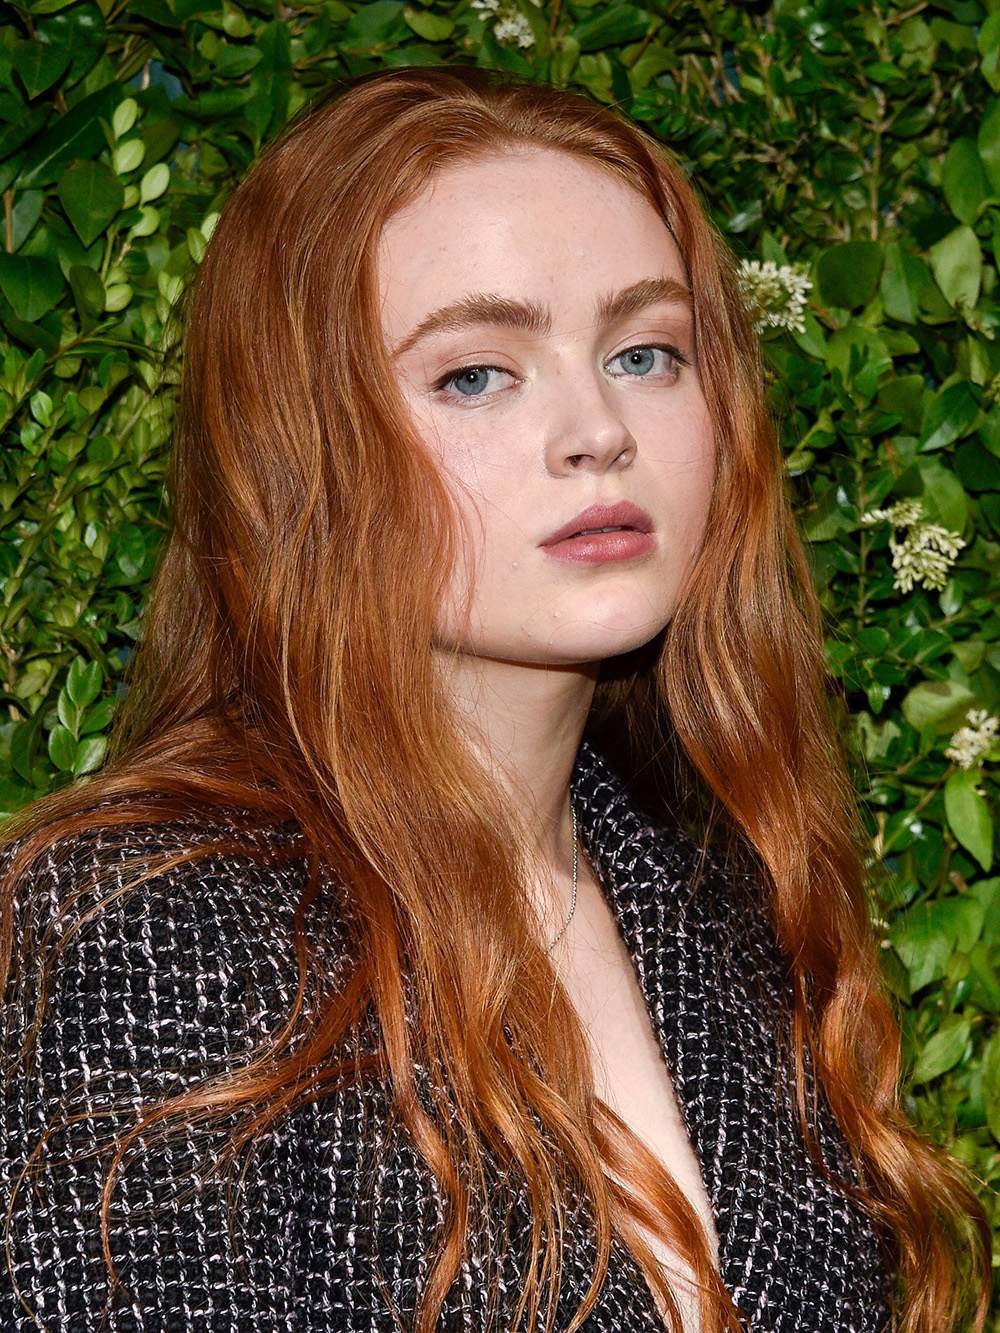 https://hollywoodlife.com/wp-content/uploads/2017/11/sadie-sink-celeb-red-heads-ss.jpg